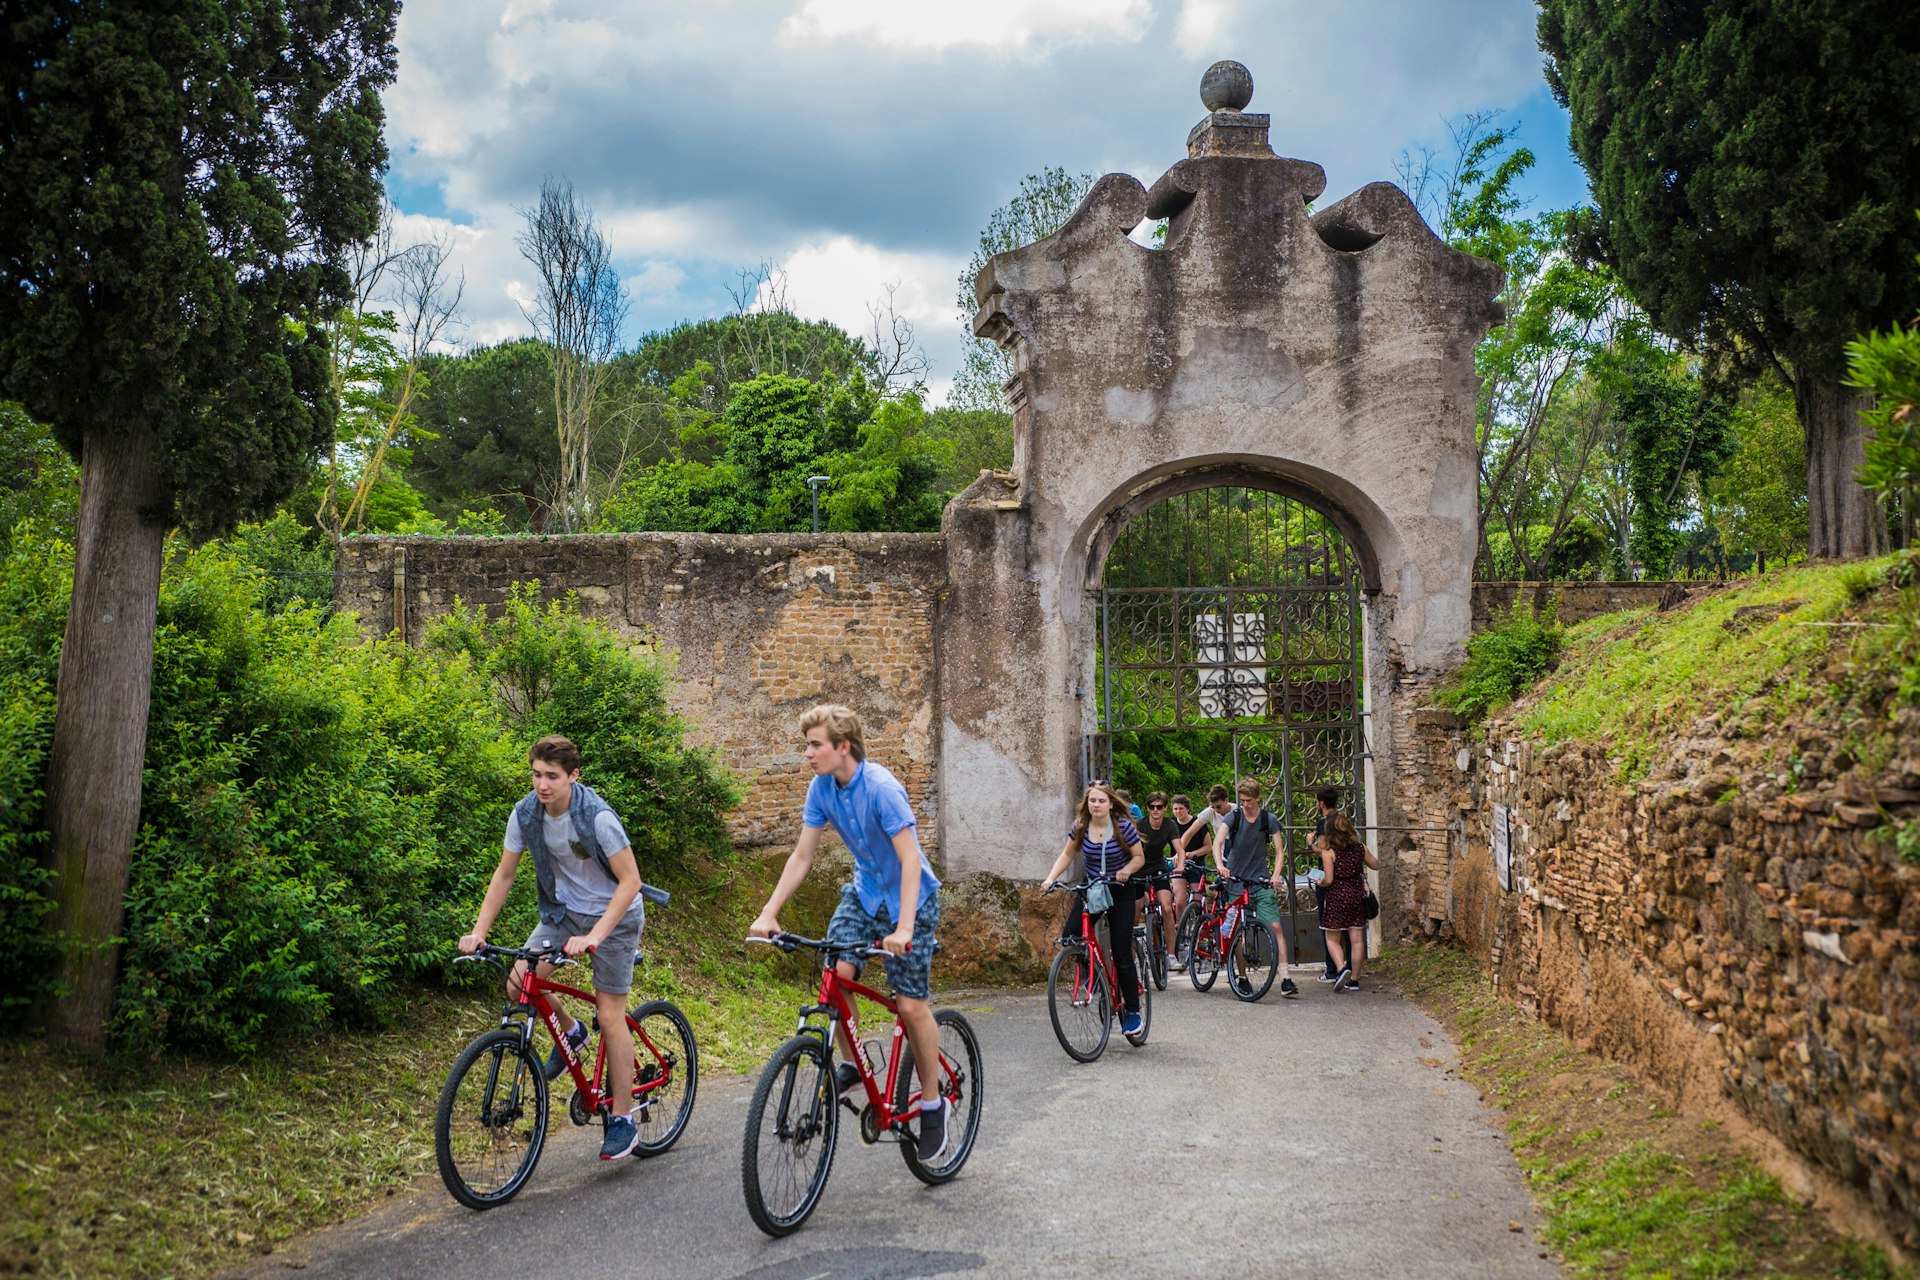 A group of kids bike through the entrance to the catacombs in Rome